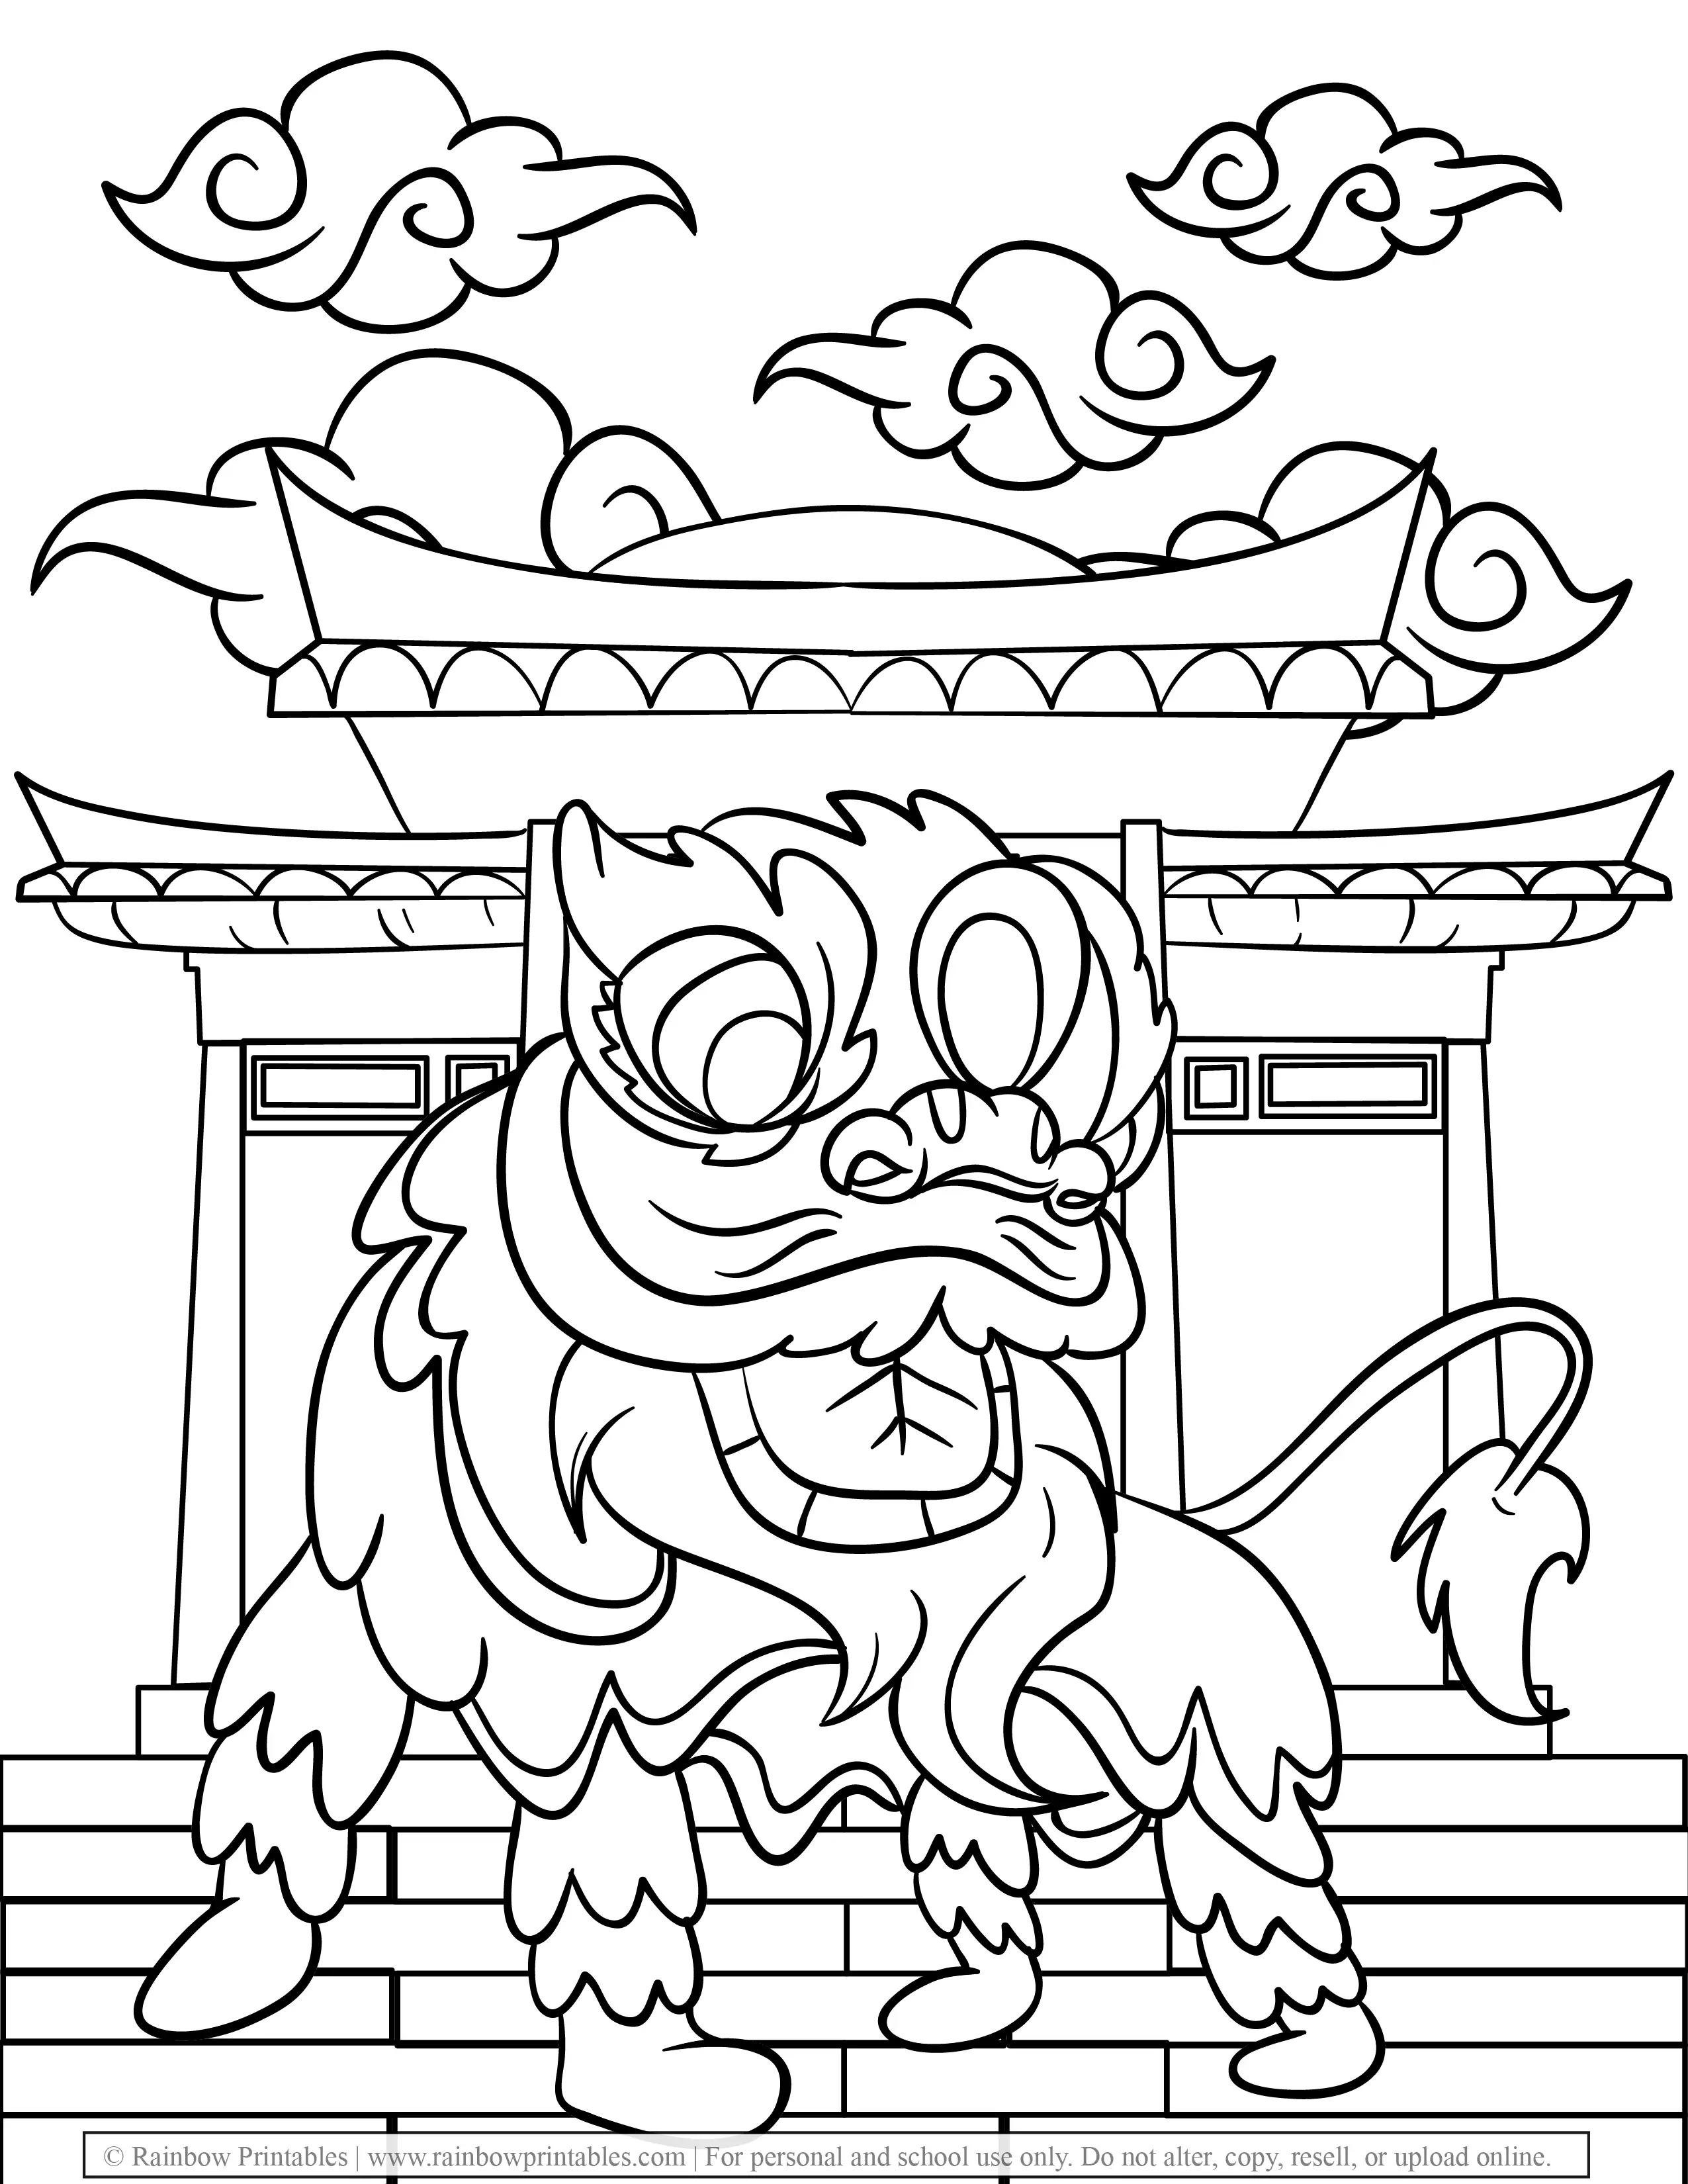 Free Coloring Pages for Kids Drawing Activities Line Art Illustration DANCING CHINATOWN LION GATE CHINESE NEW YEAR